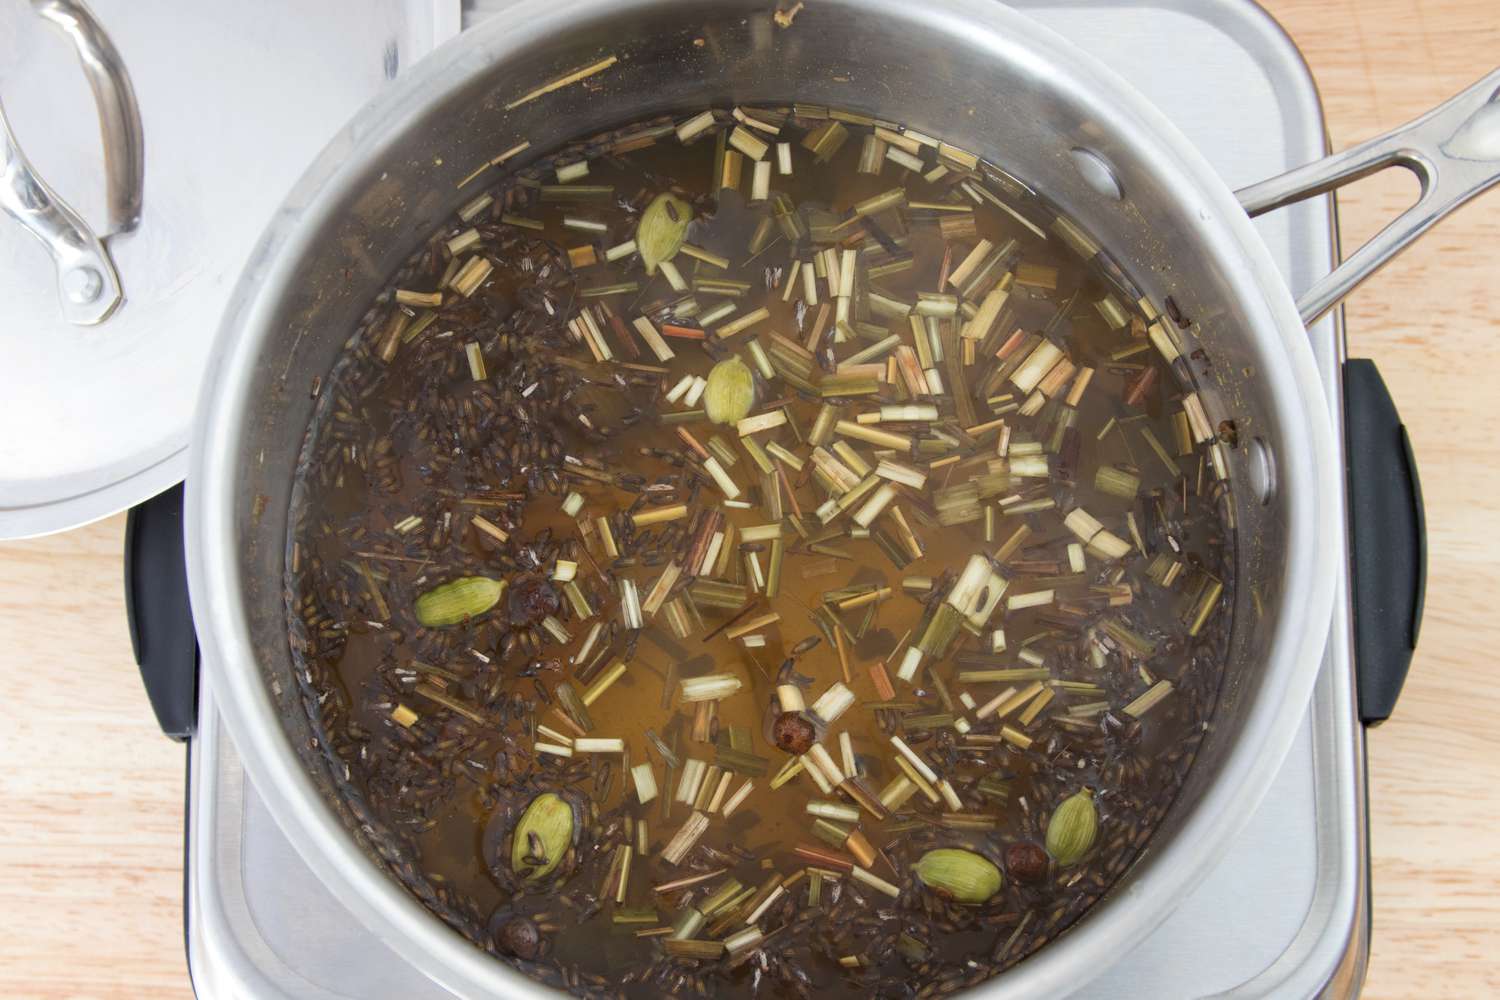 Simmering Botanicals for Homemade Cinchona-Free Tonic Syrup